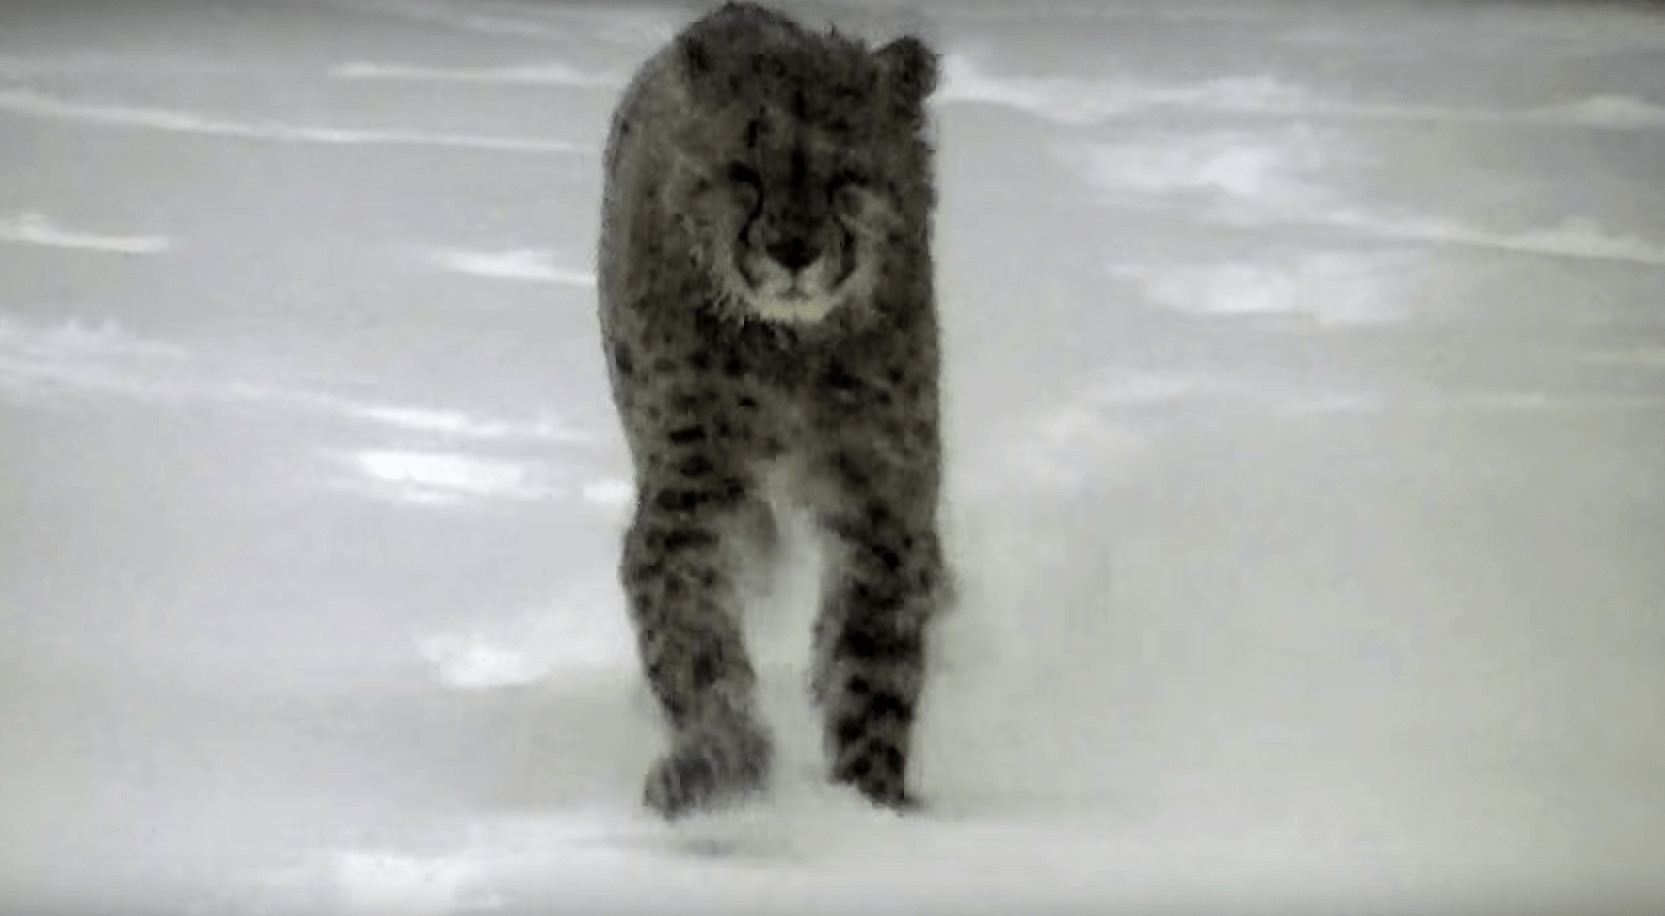 A cheetah plays in the snow!